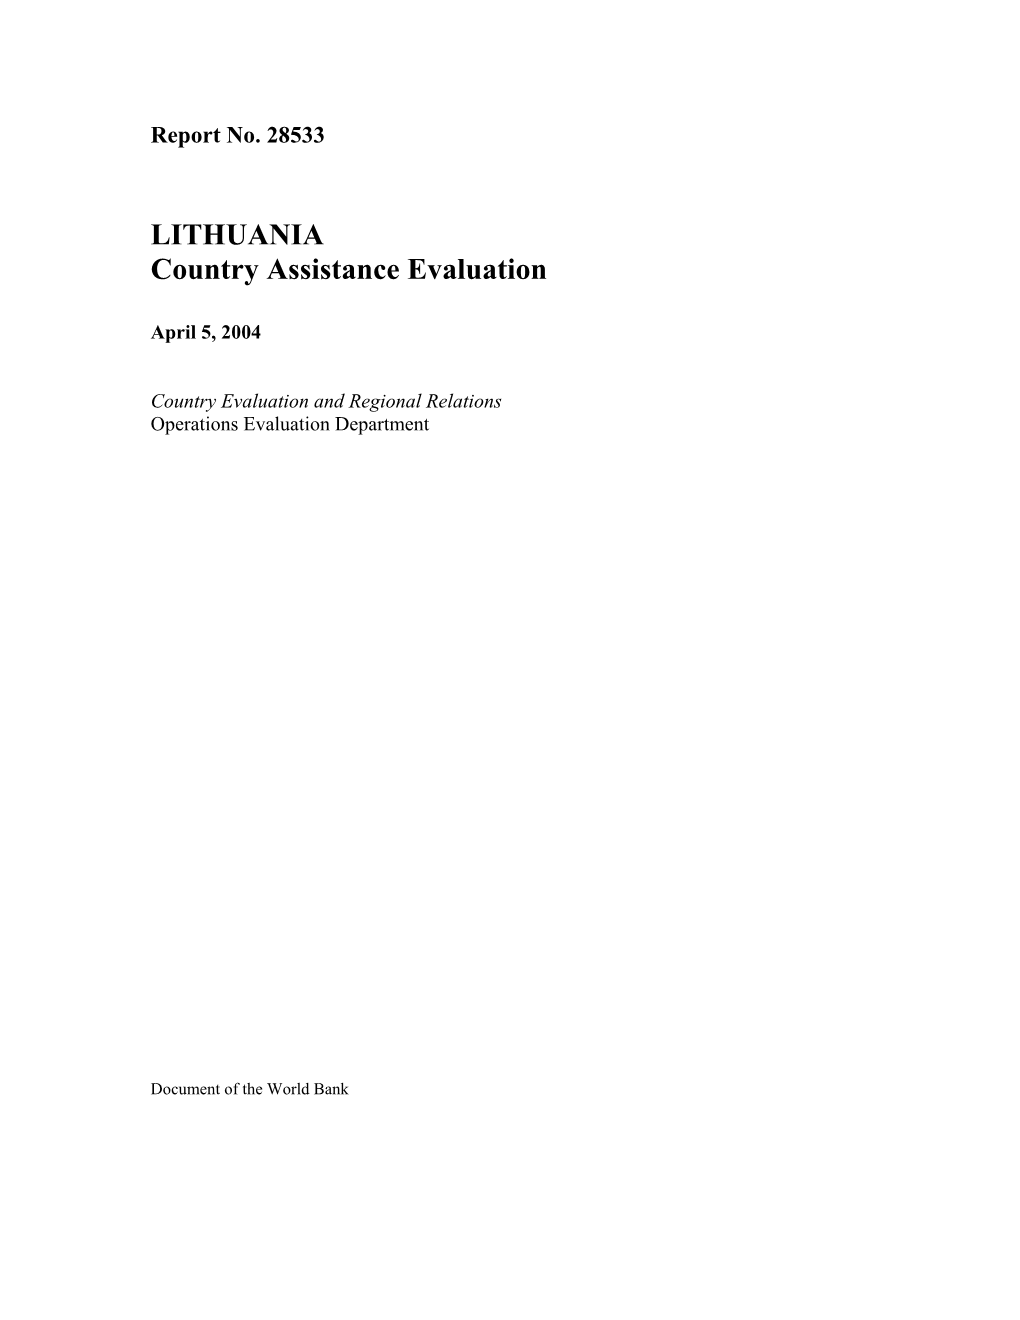 LITHUANIA Country Assistance Evaluation